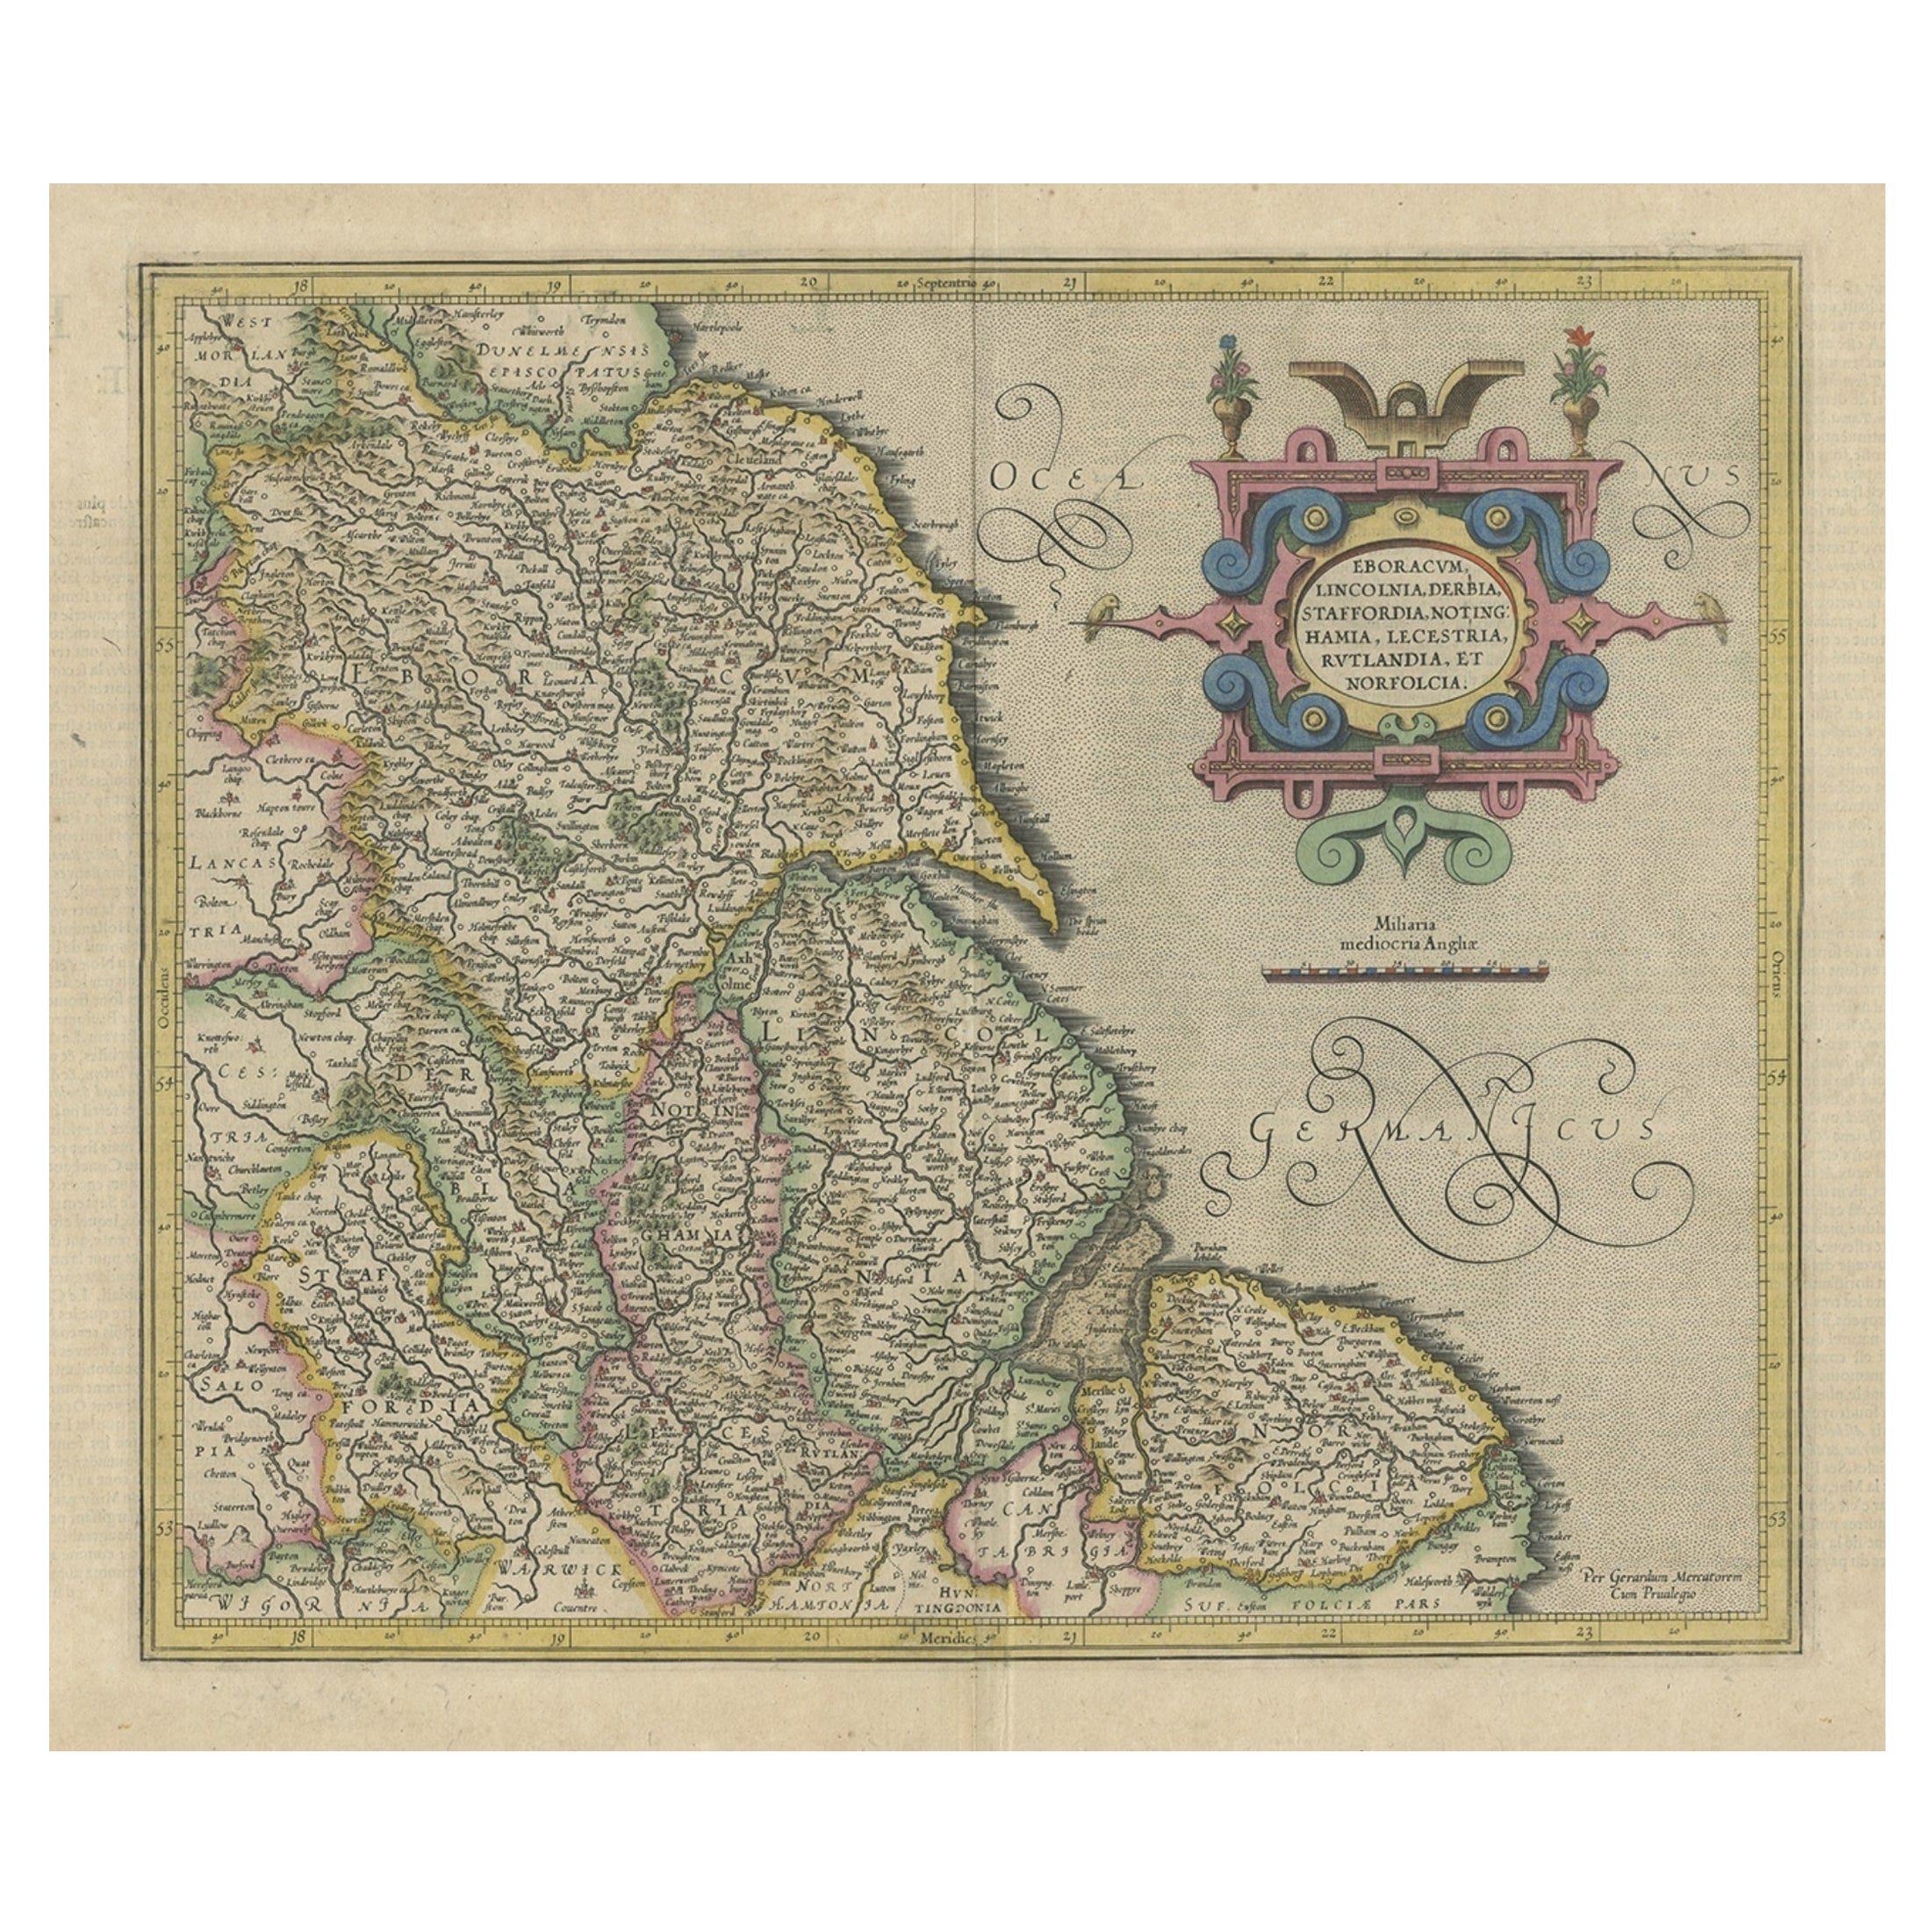 Decorative Early Hand-Colored Map of the Northeast of England, ca.1620